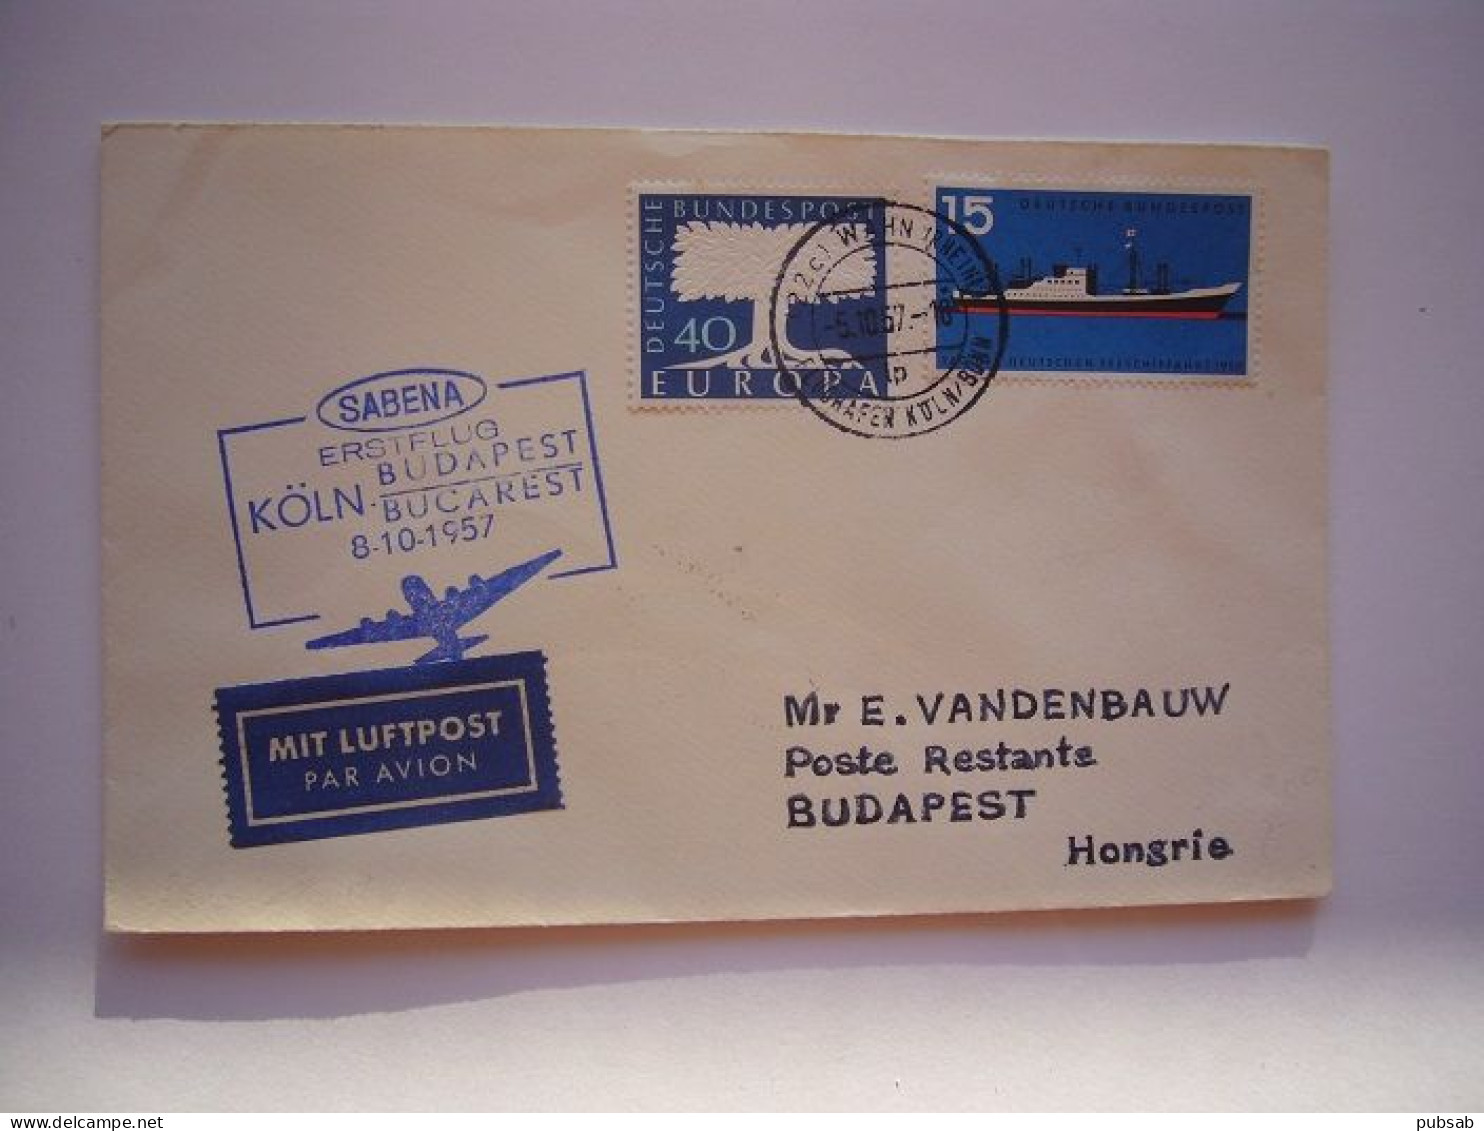 Avion / Airplane / SABENA / First Flight From Köln To Budapest / Oct 8, 1957 - Covers & Documents